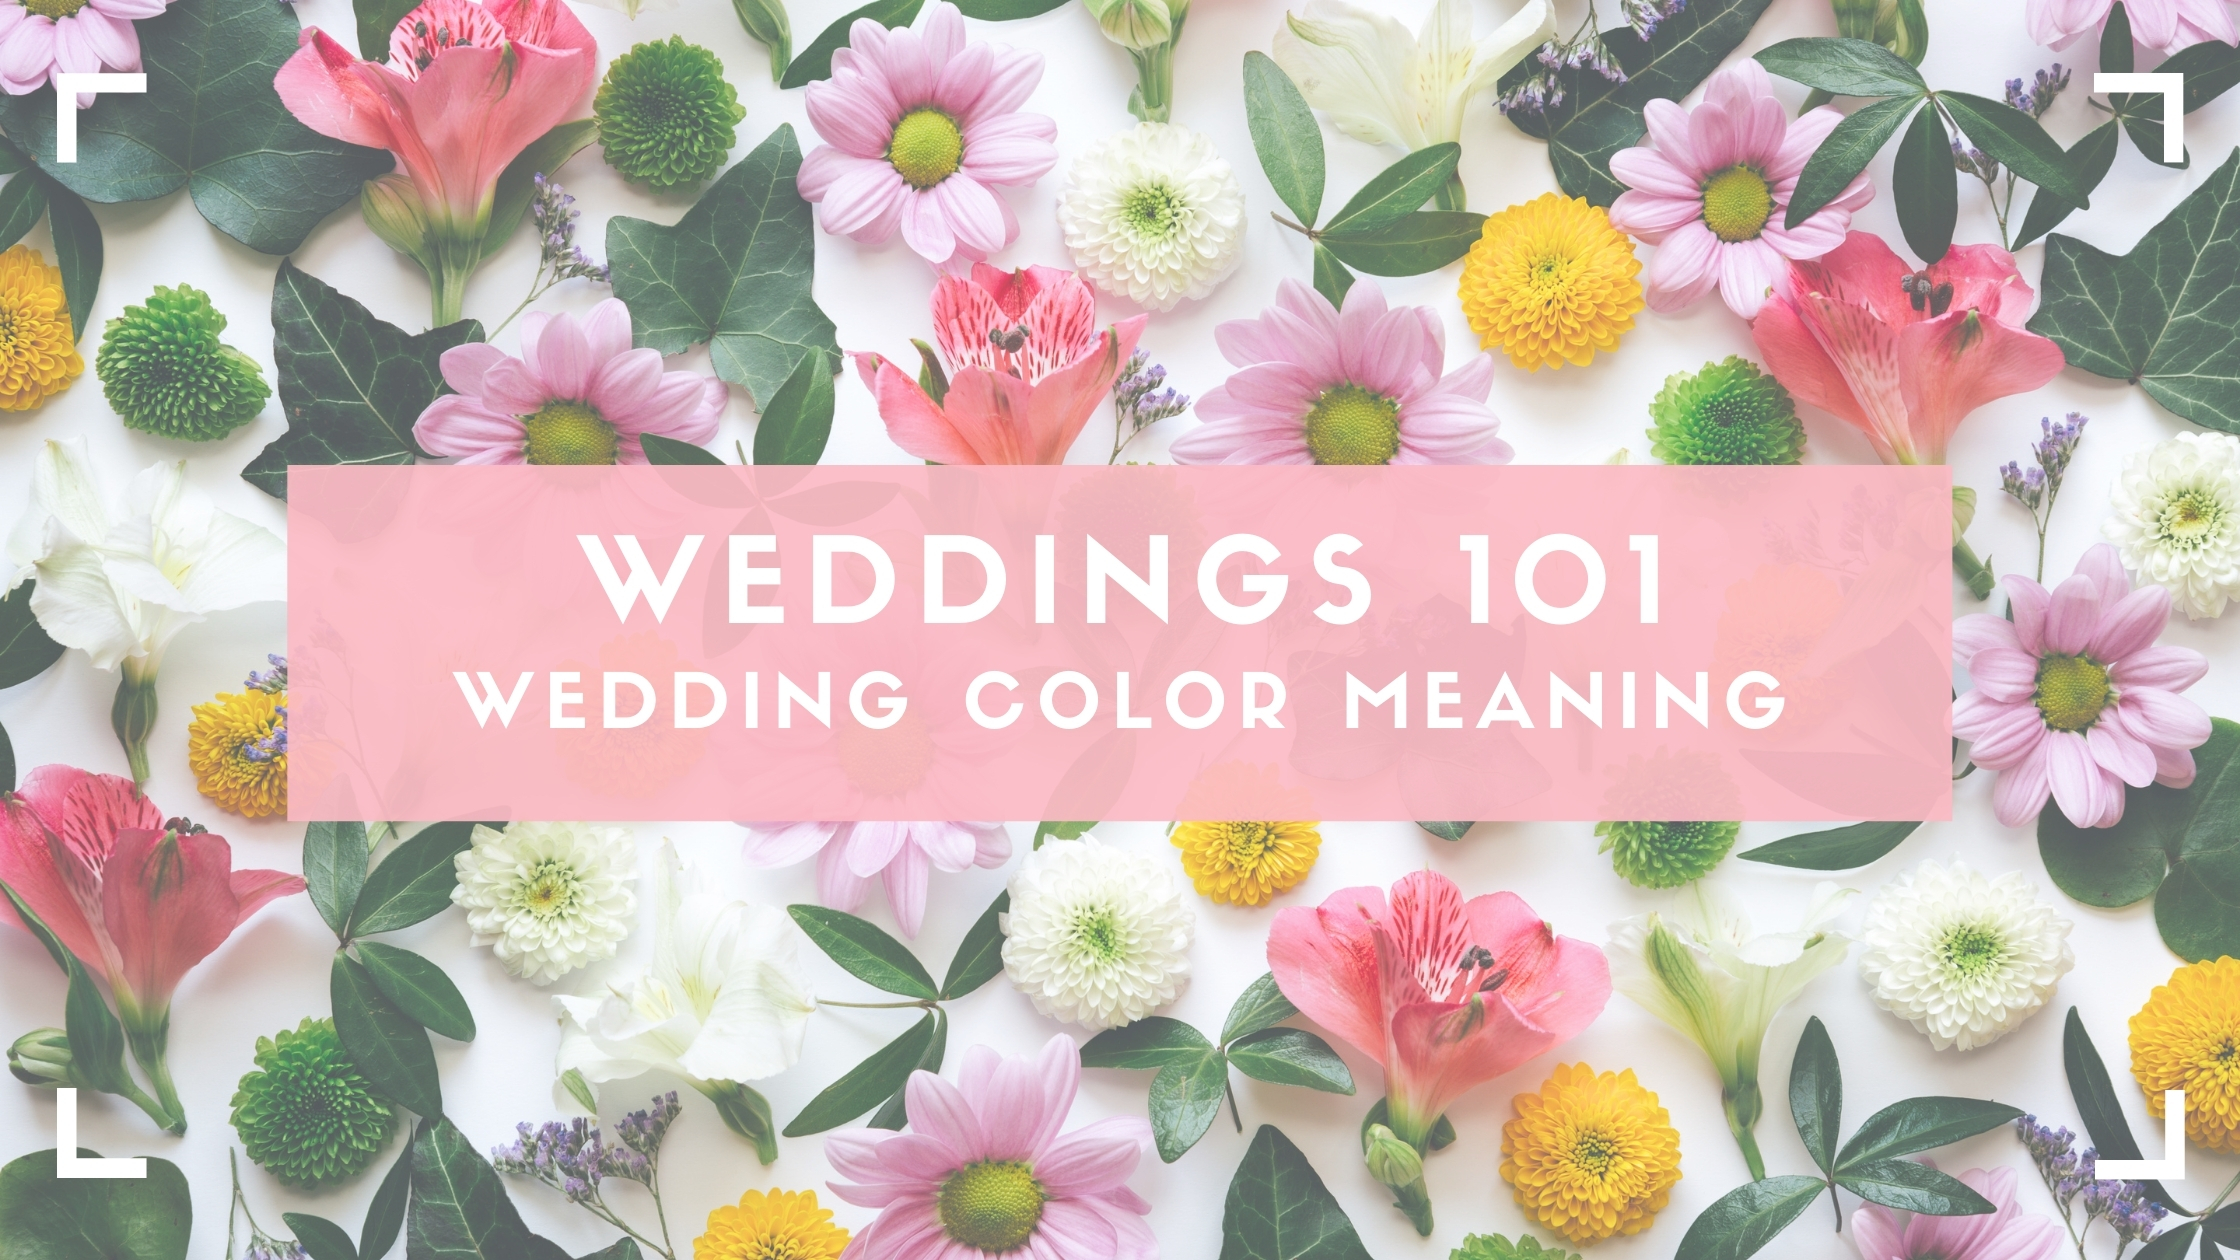 Weddings 101 Wedding Color Meaning pic